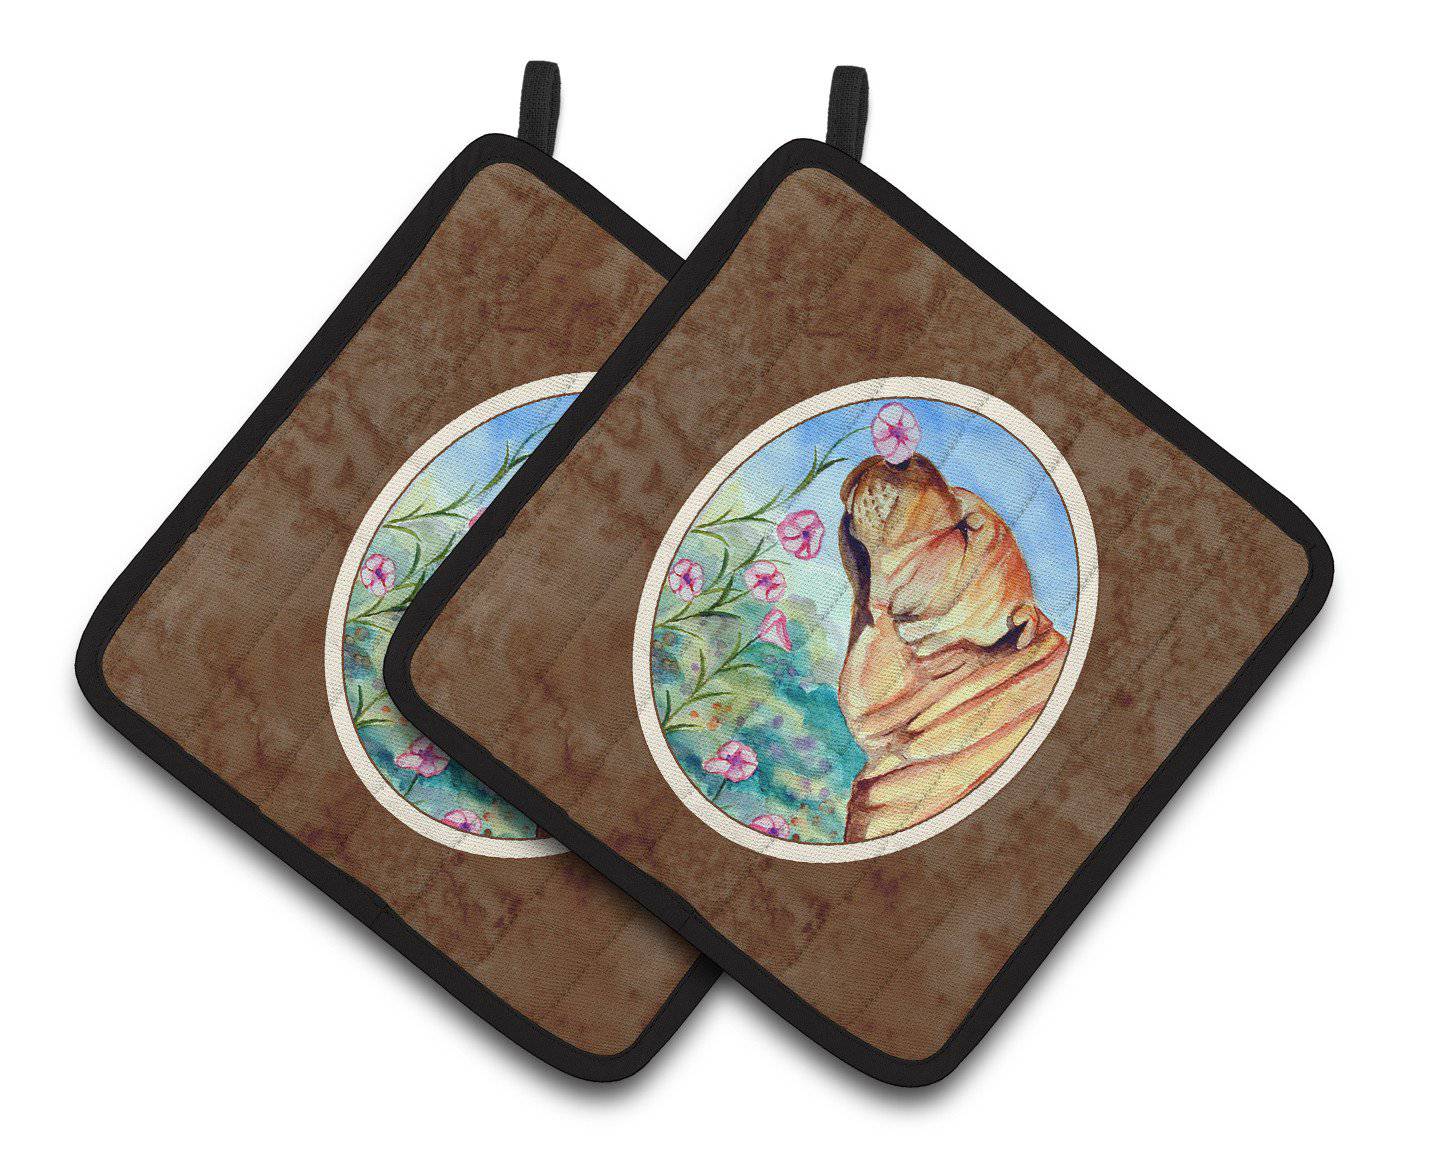 Shar Pei Smell the flowers Pair of Pot Holders 7105PTHD - the-store.com